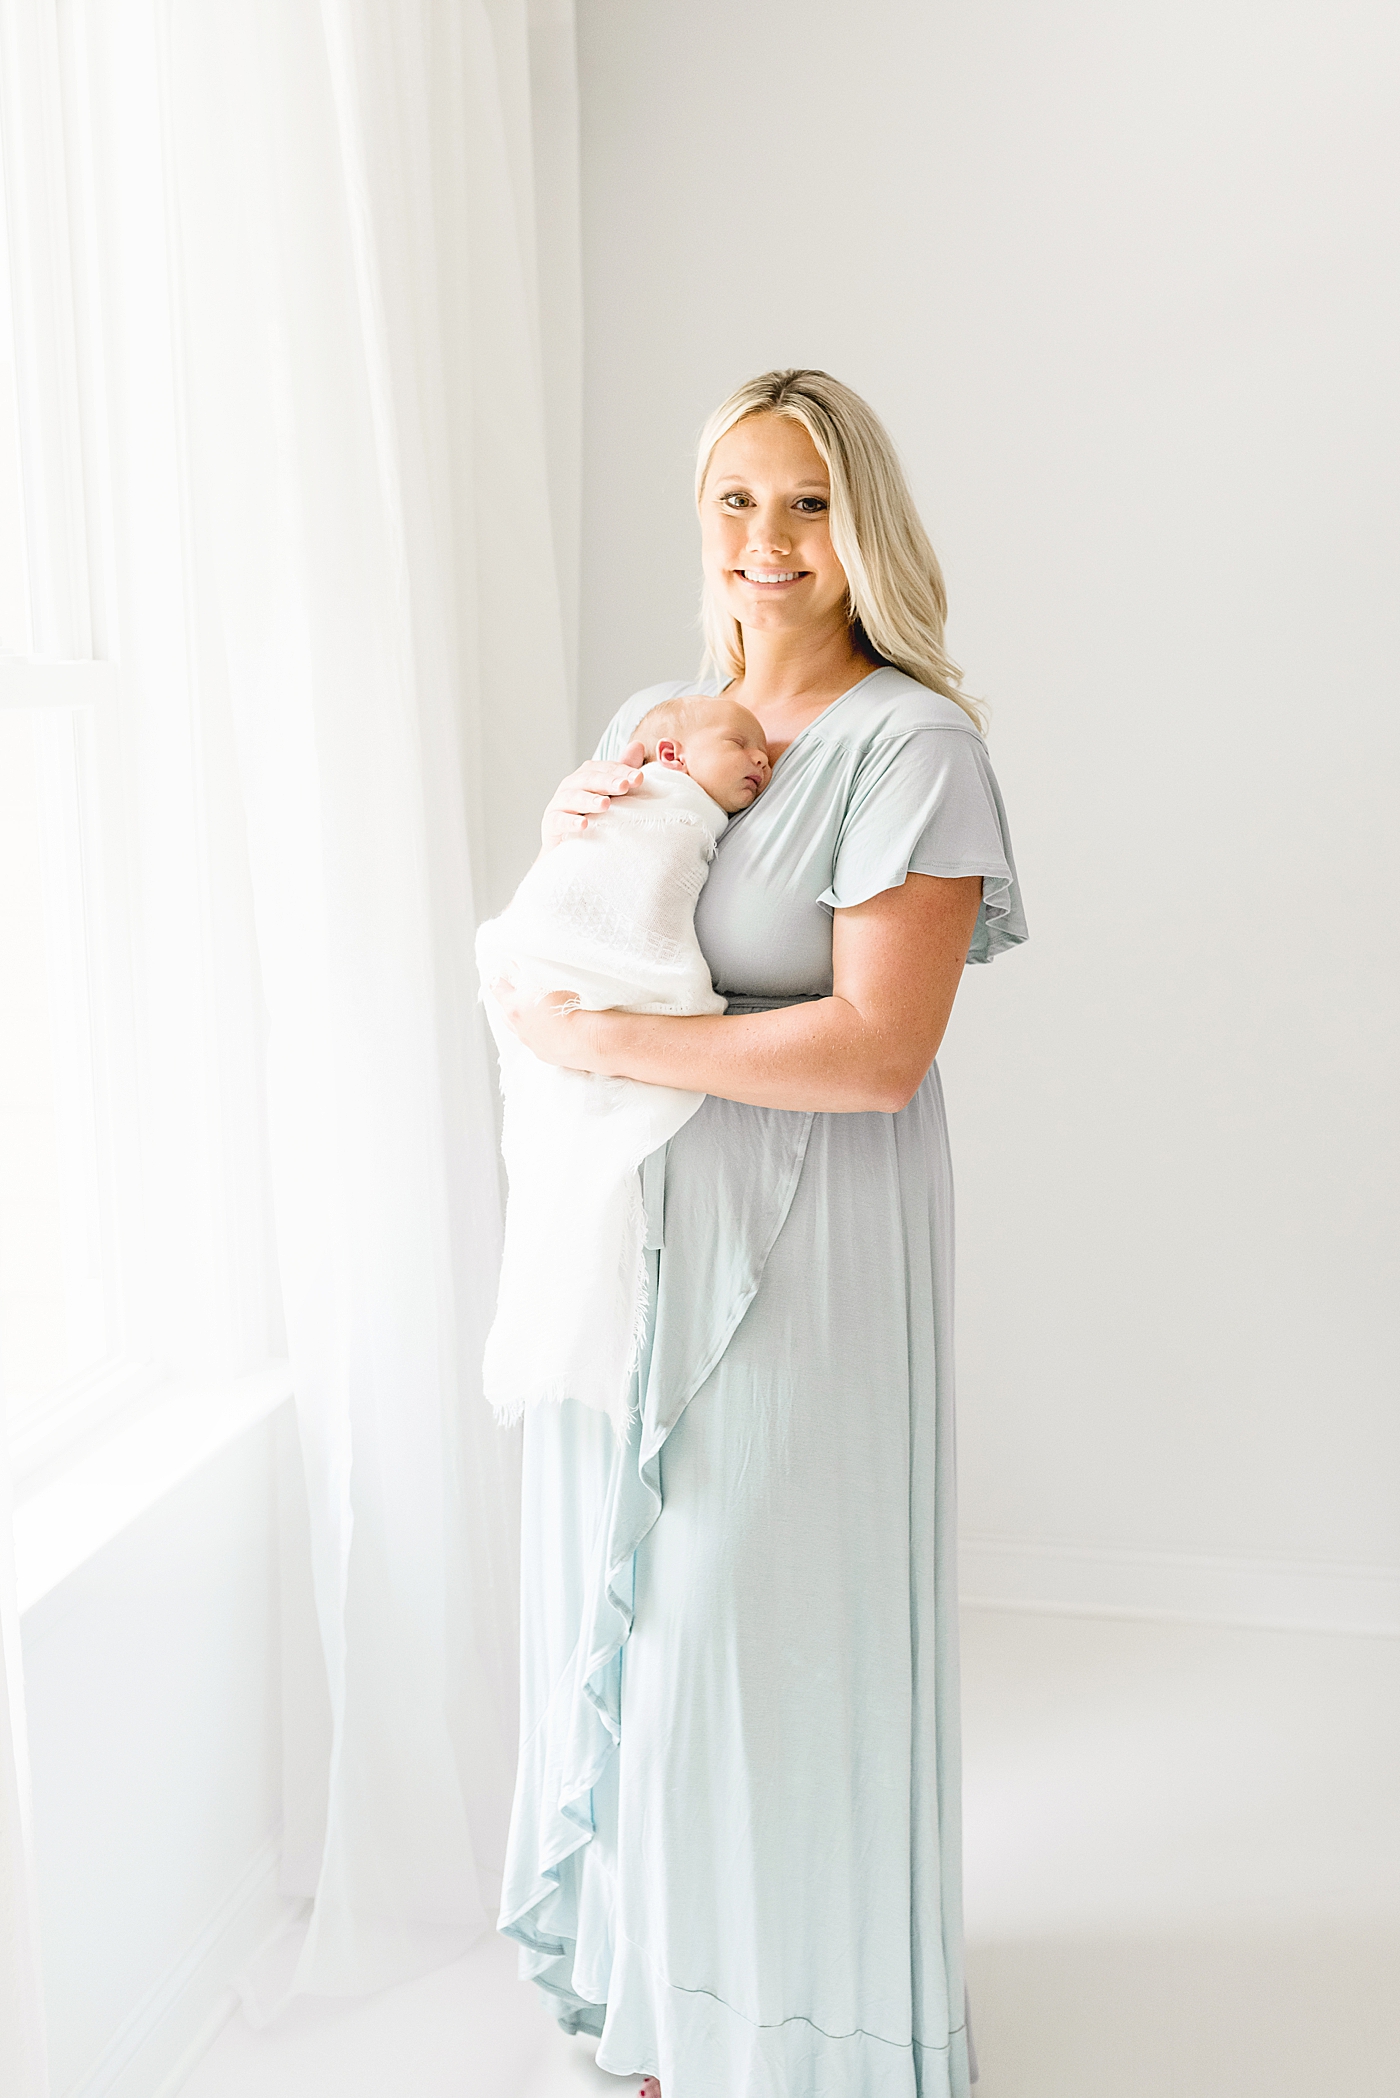 Mom smiling at the camera while holding newborn baby girl | Photo by Anna Wisjo Photography